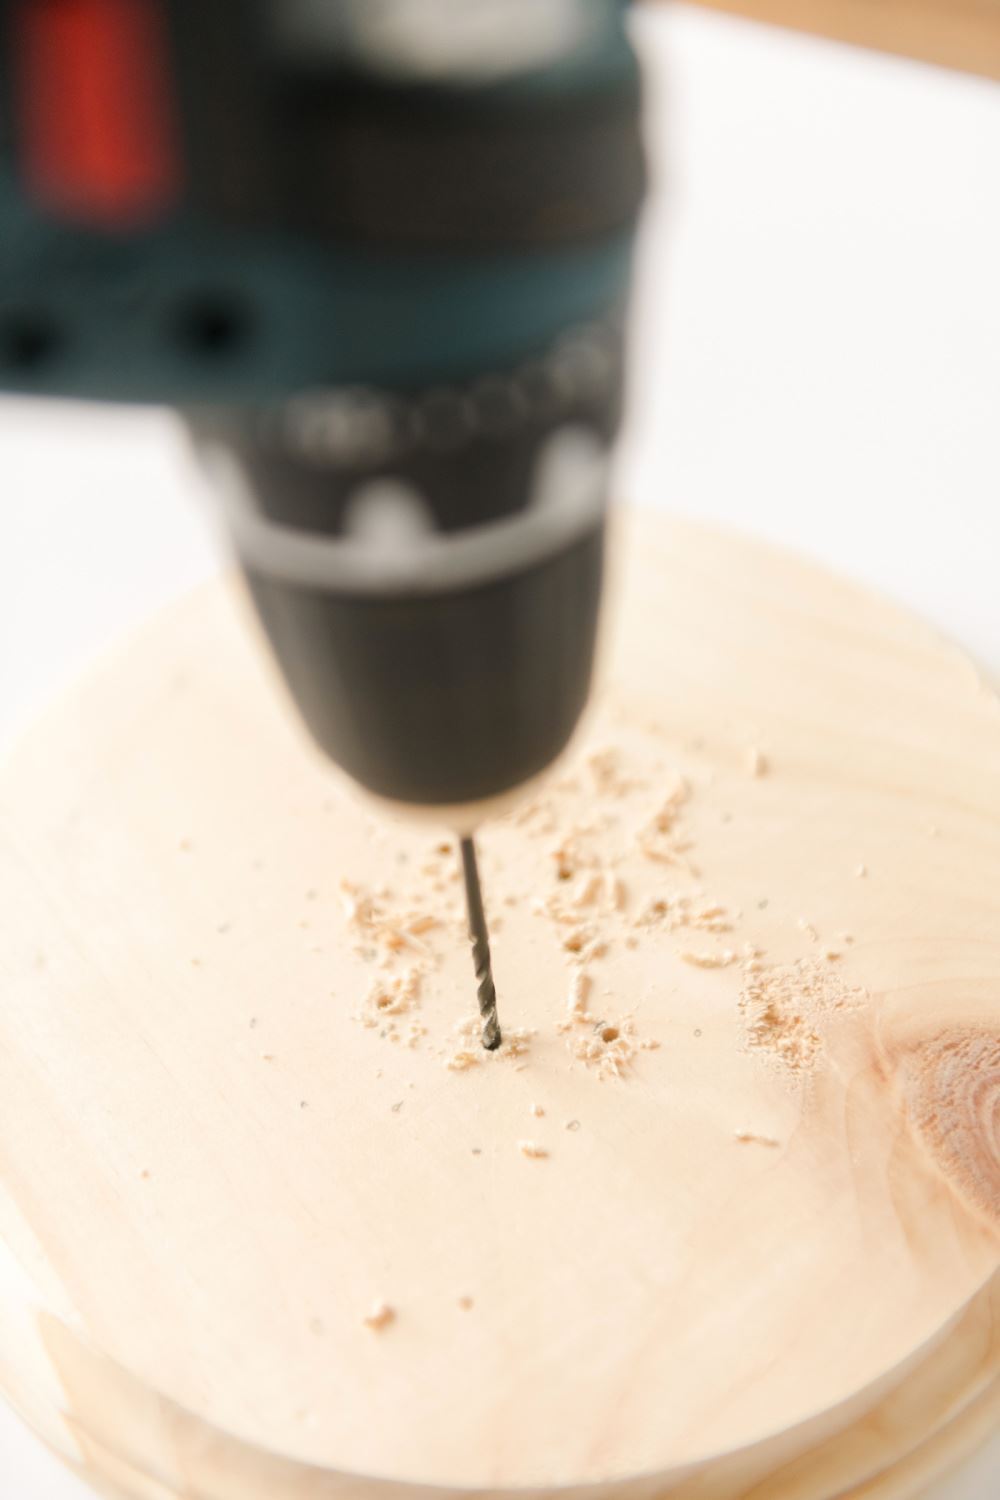 Drill holes into wooden round